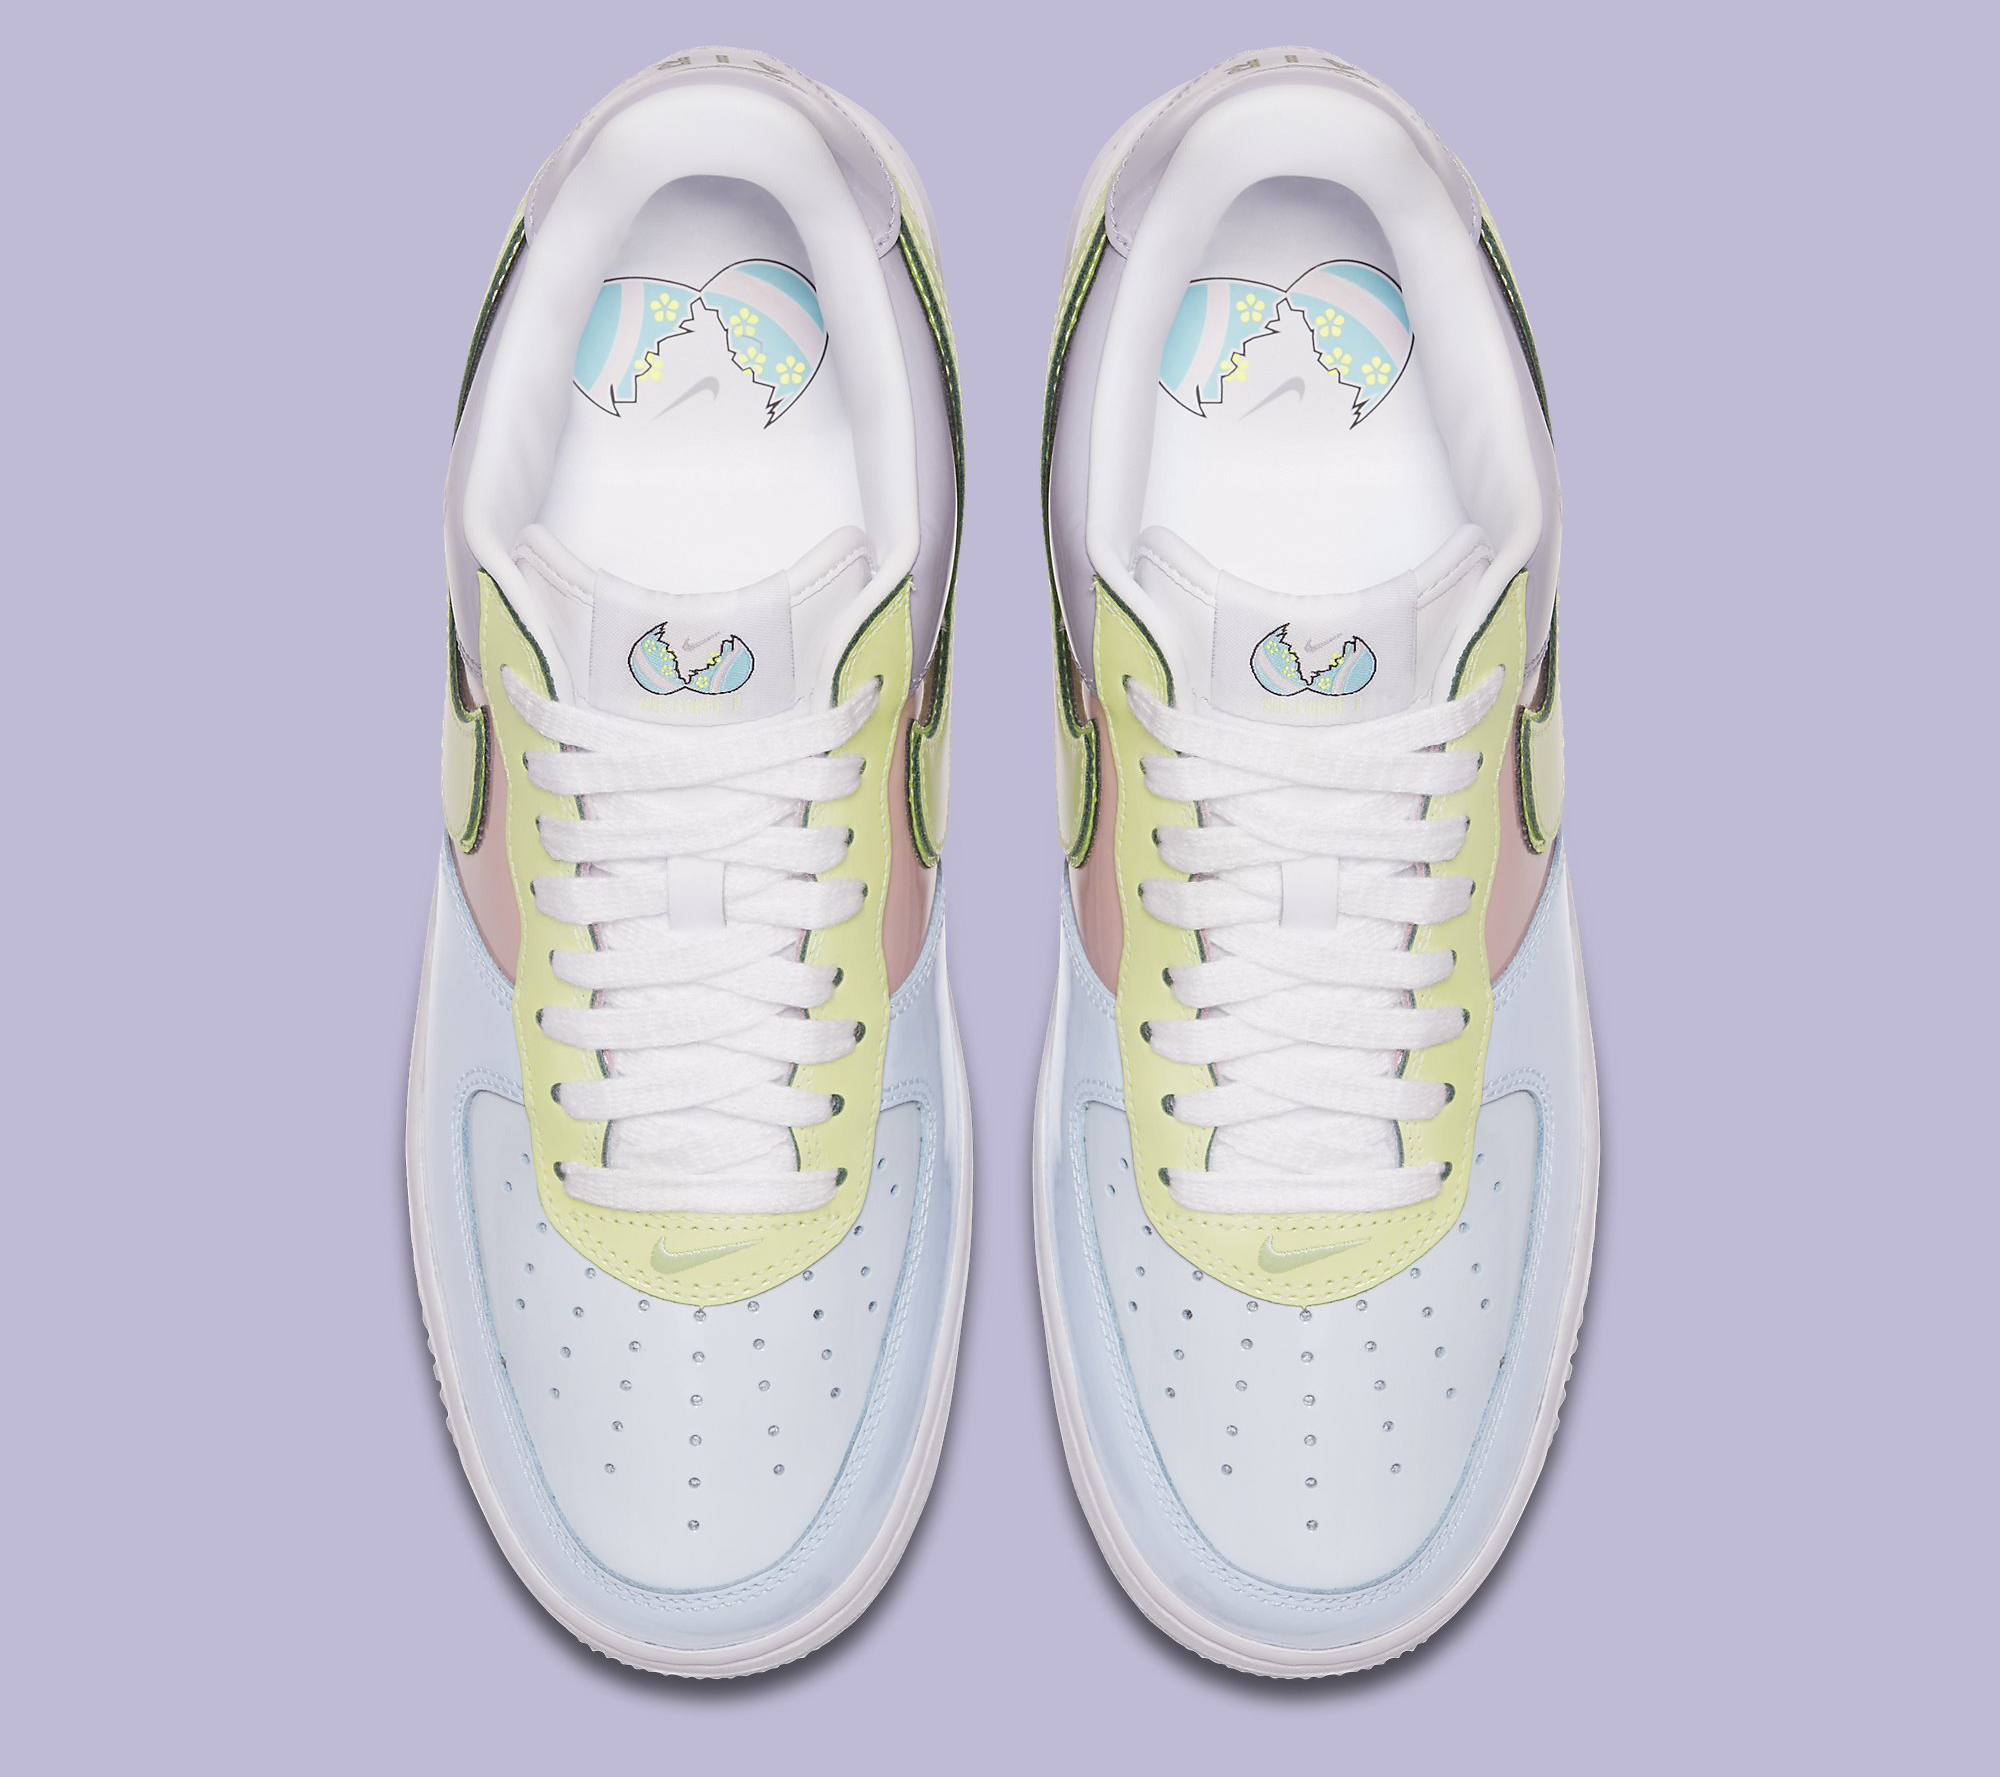 easter air force 1s